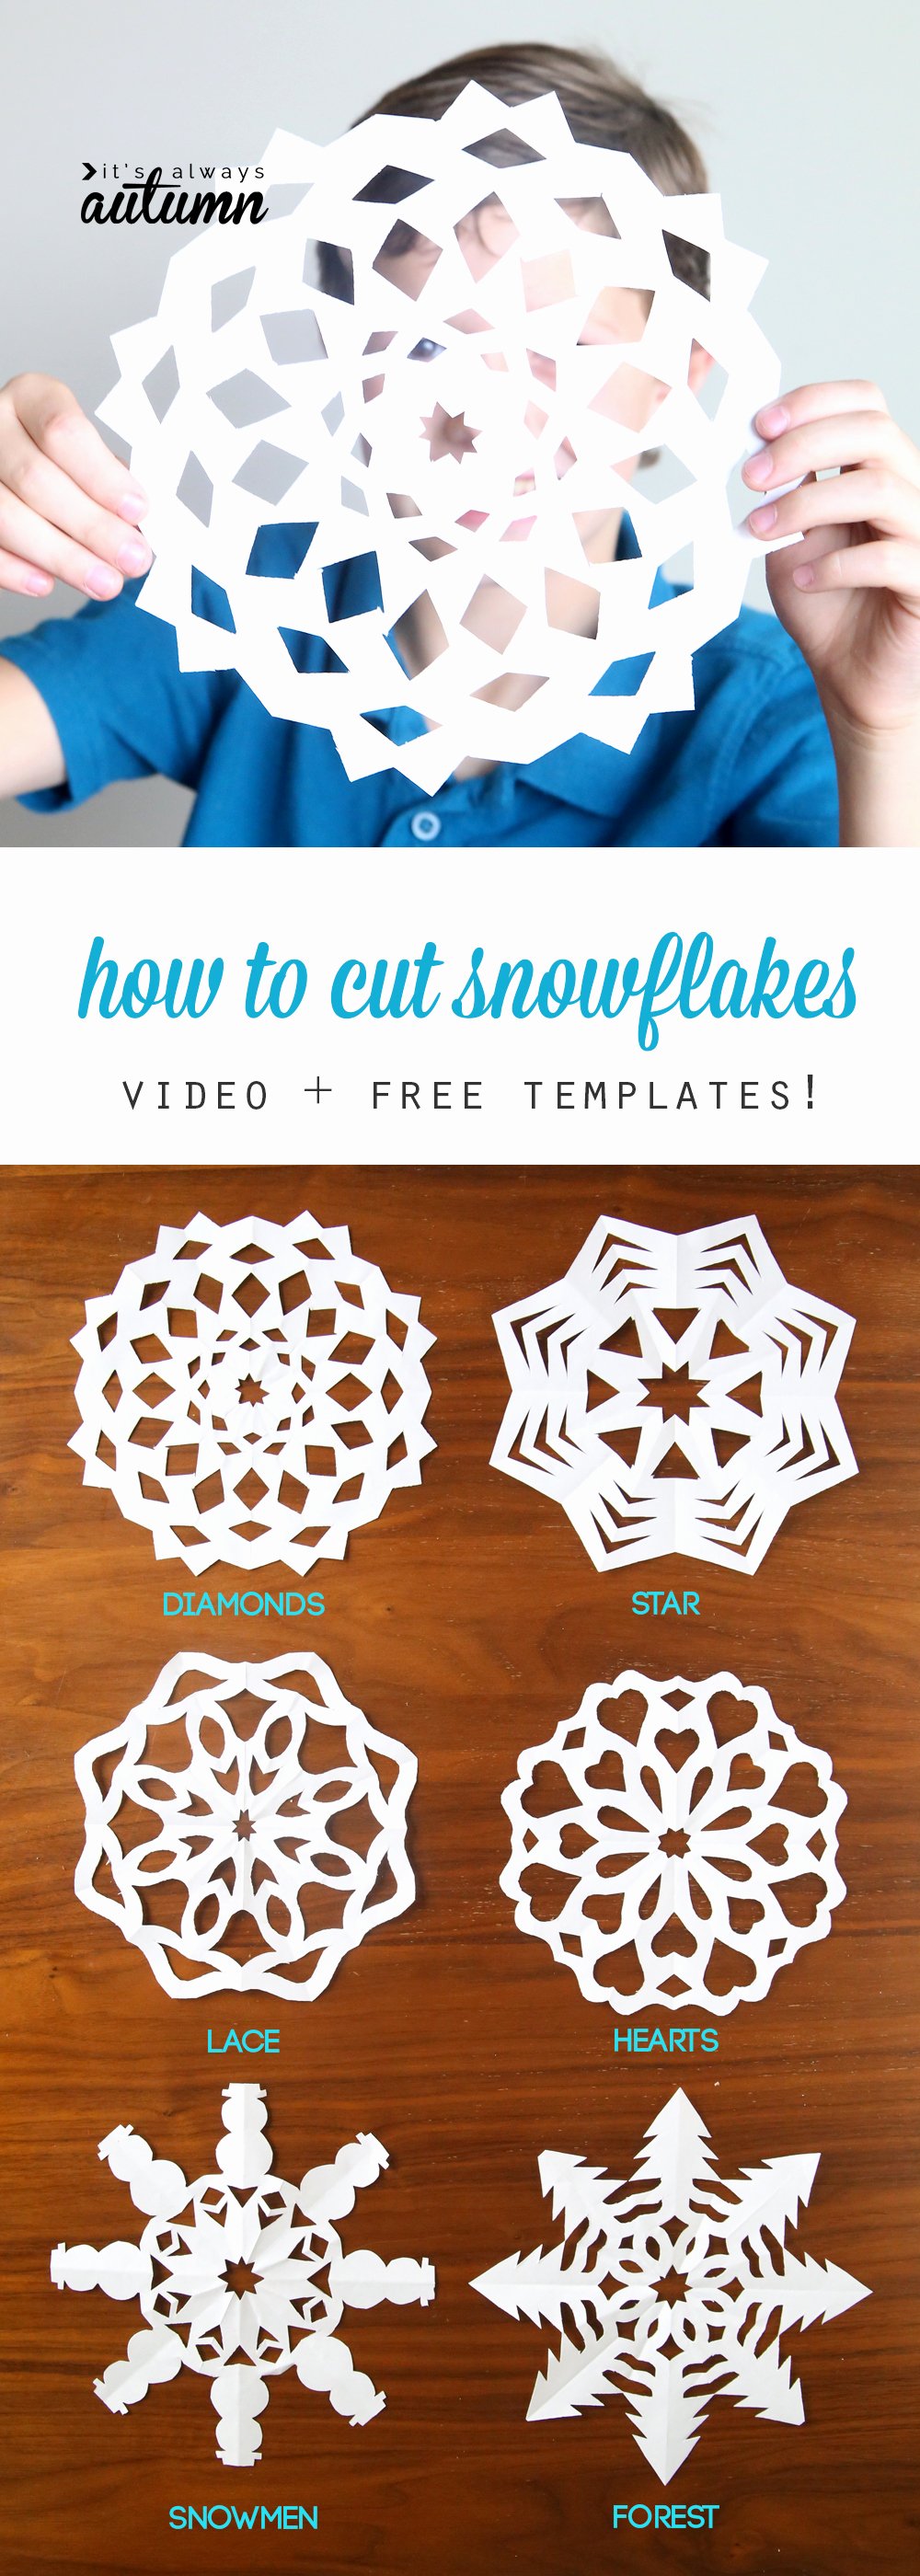 Paper Cut Out Templates Lovely How to Cut Snowflakes Video Tutorial Free Templates It S Always Autumn